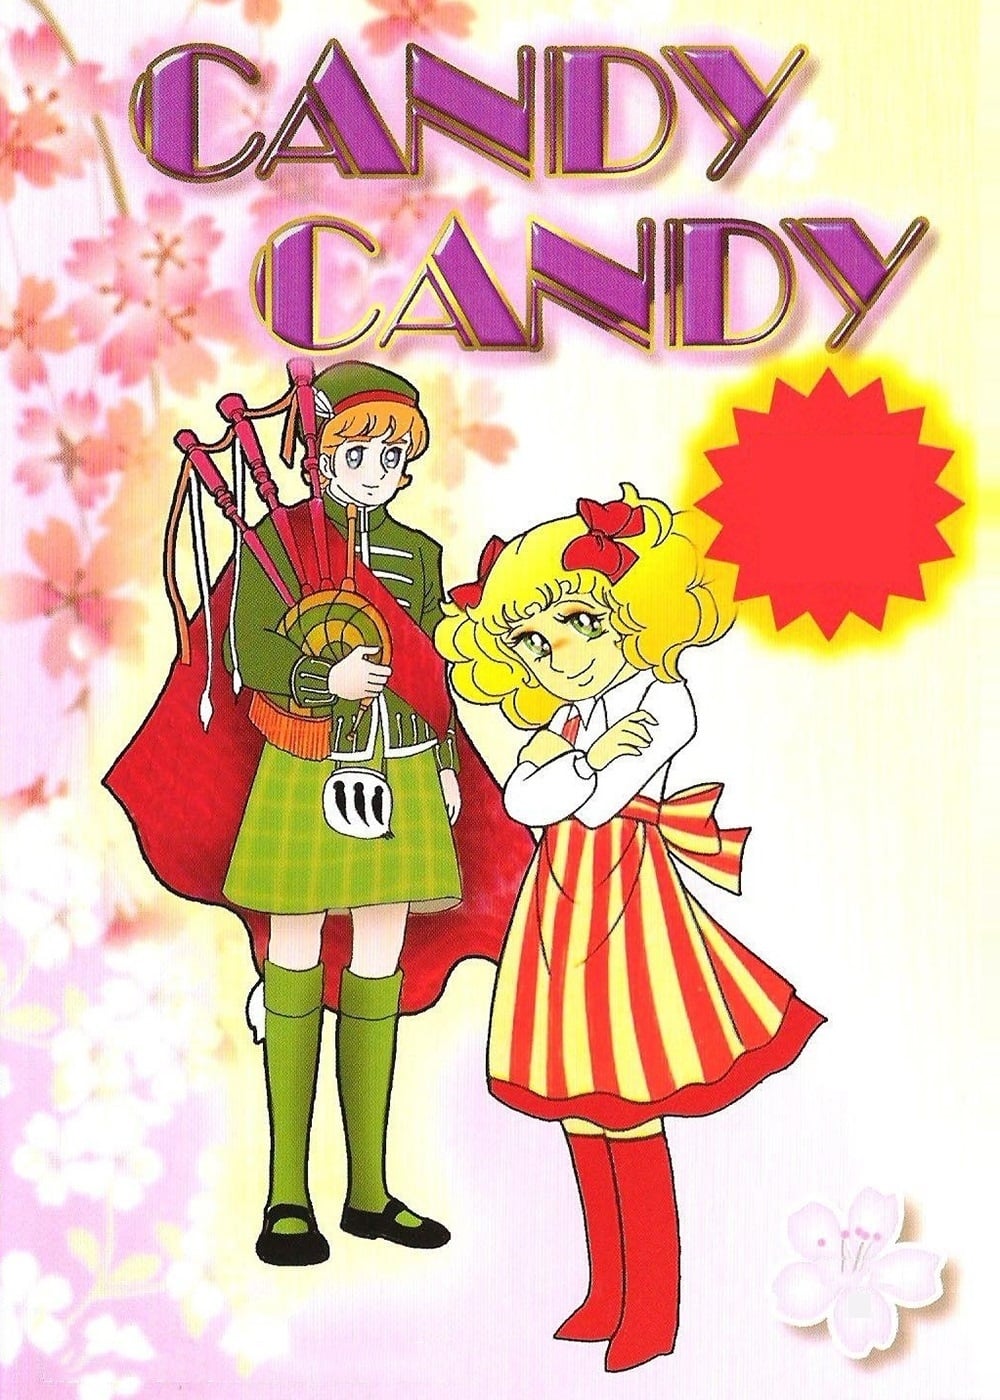 Candy Candy (TV Series 1976-1979) - Posters — The Movie Database (TMDB)